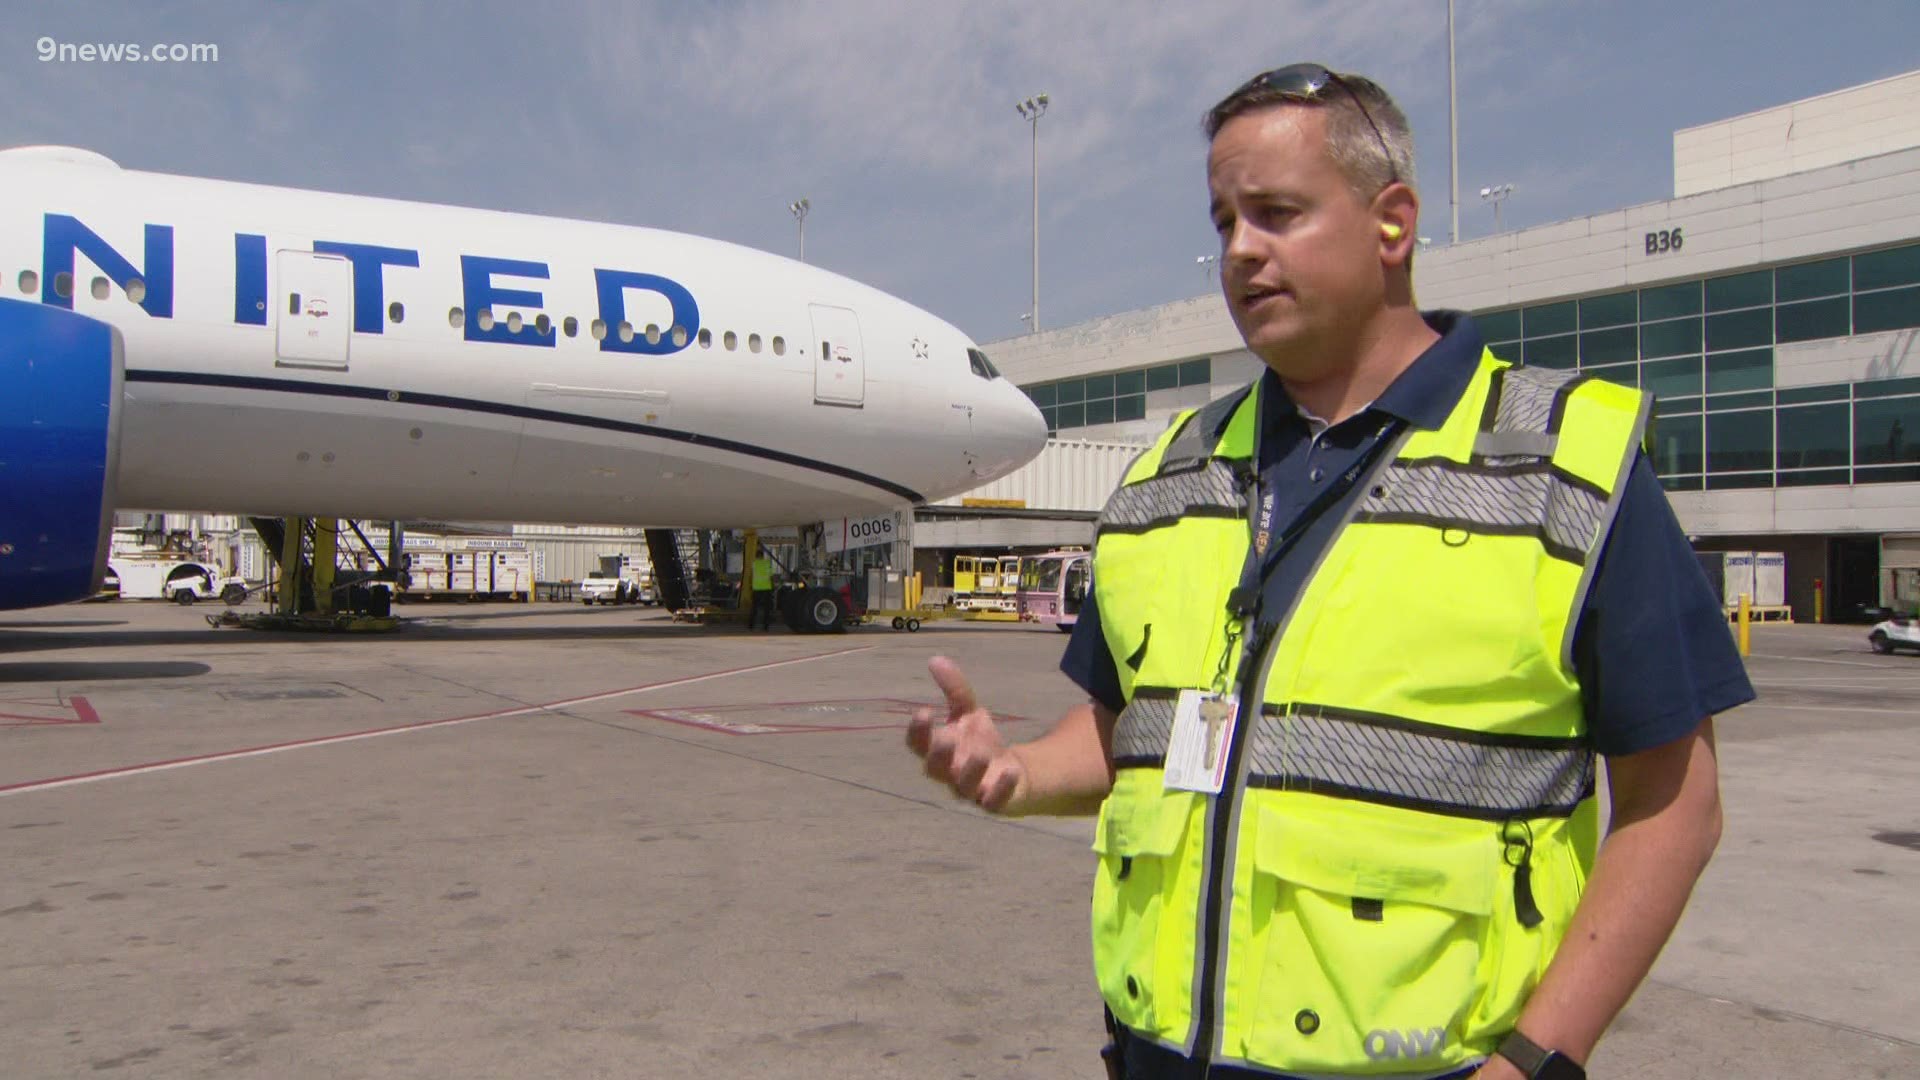 United Airlines shows 9News how they are keeping customers and employees safe and cool while keeping up with summer travel demands.